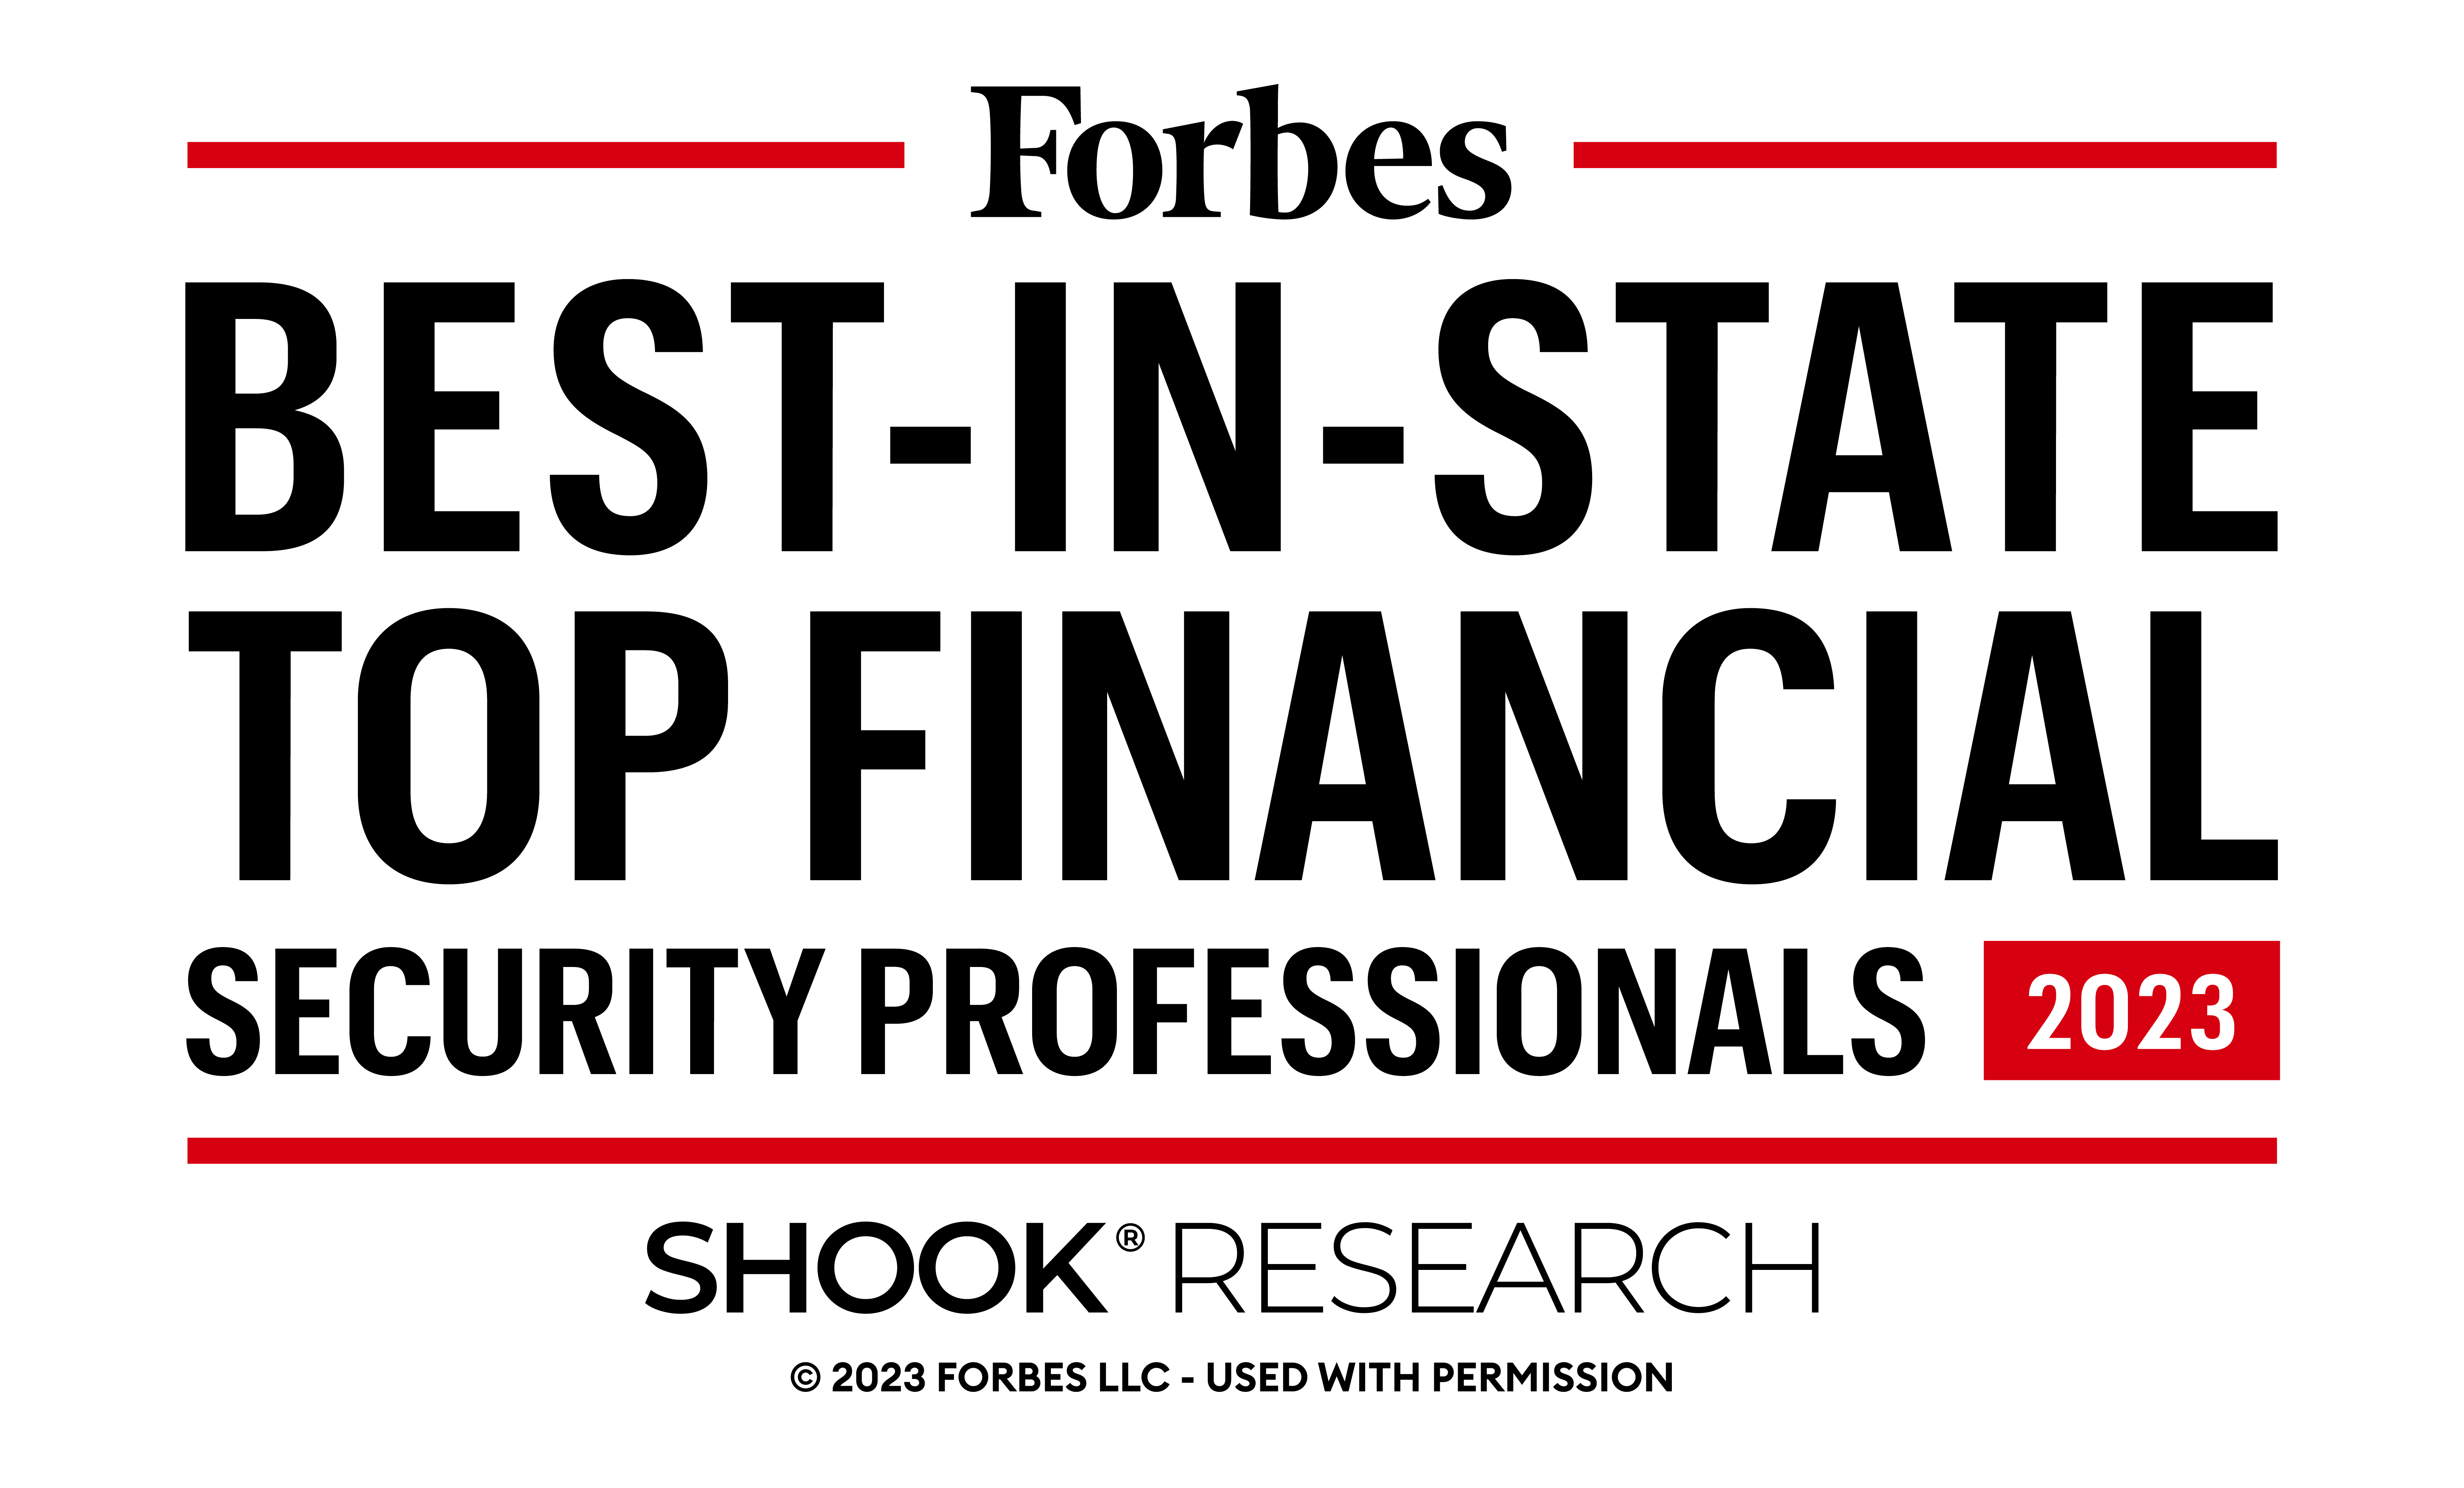 Forbes Best-In-State Top Financial Security Professionals 2023 logo